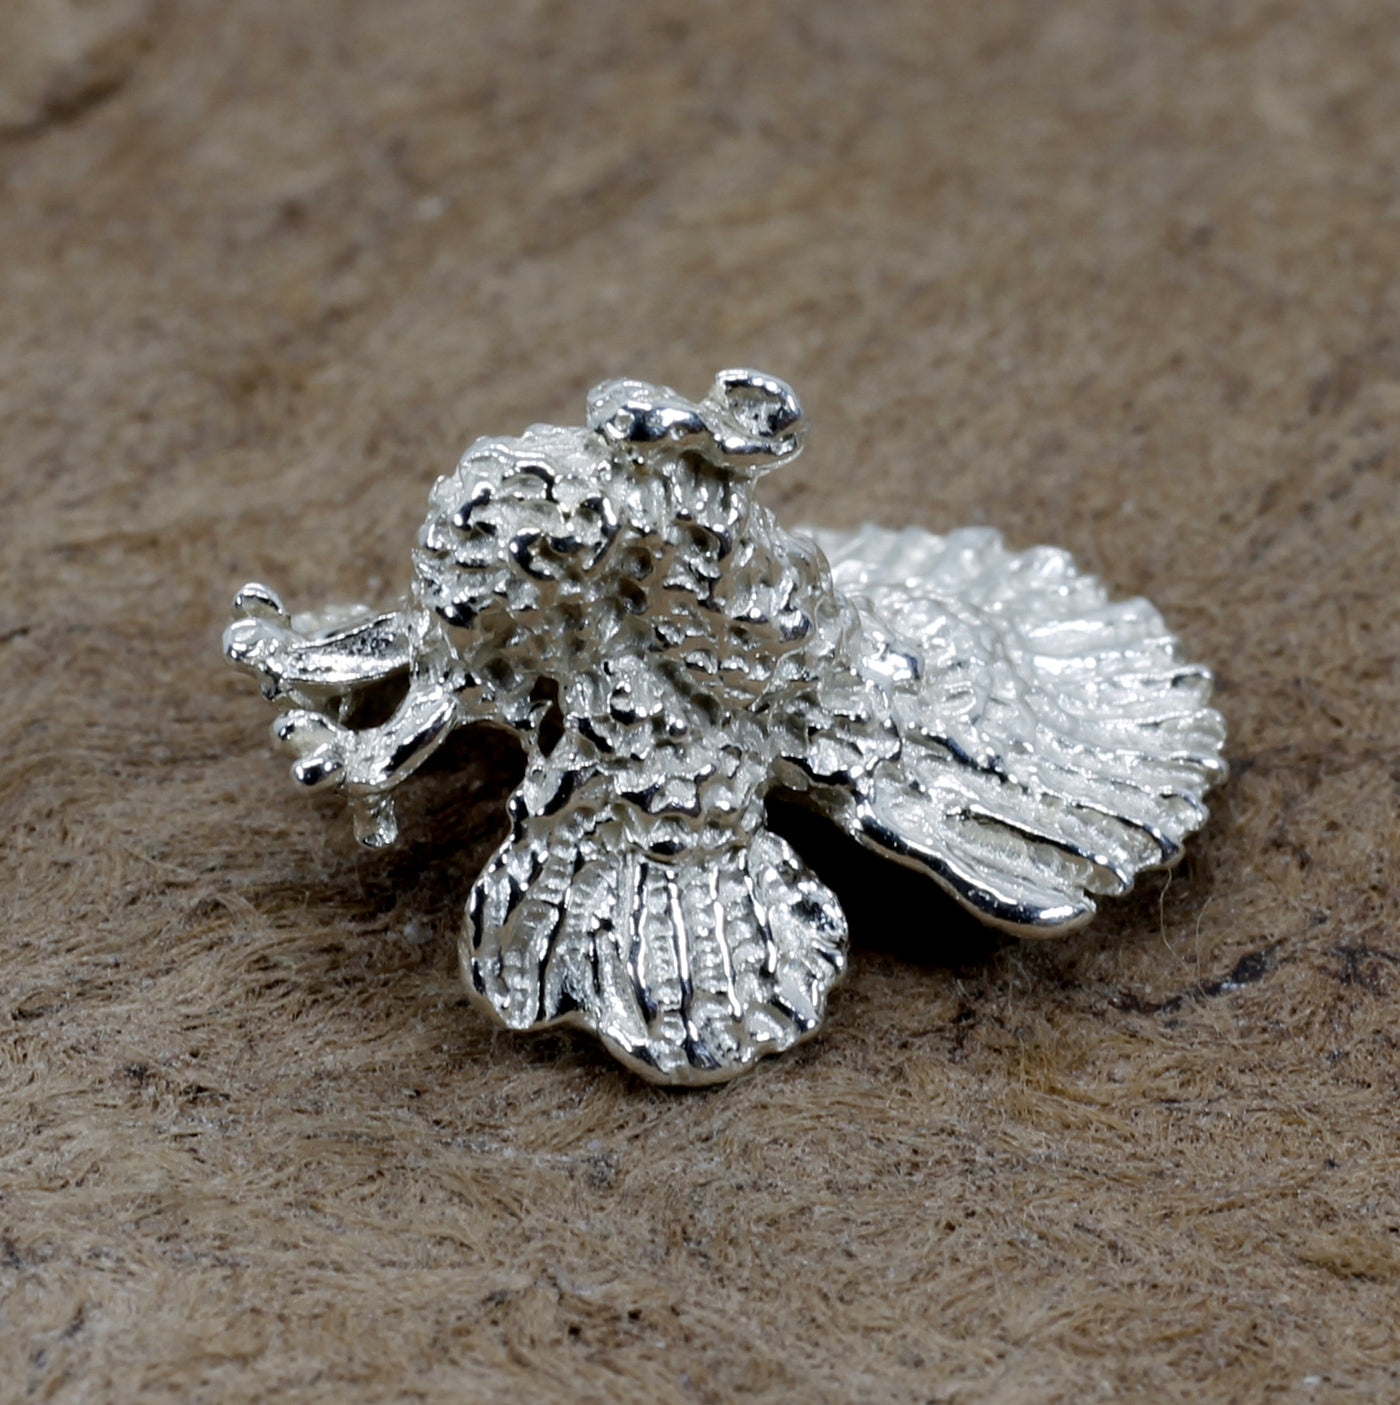 Silver Turkey Tie Tack for Mans Tie or Lapel with 925 Sterling Silver Turkey